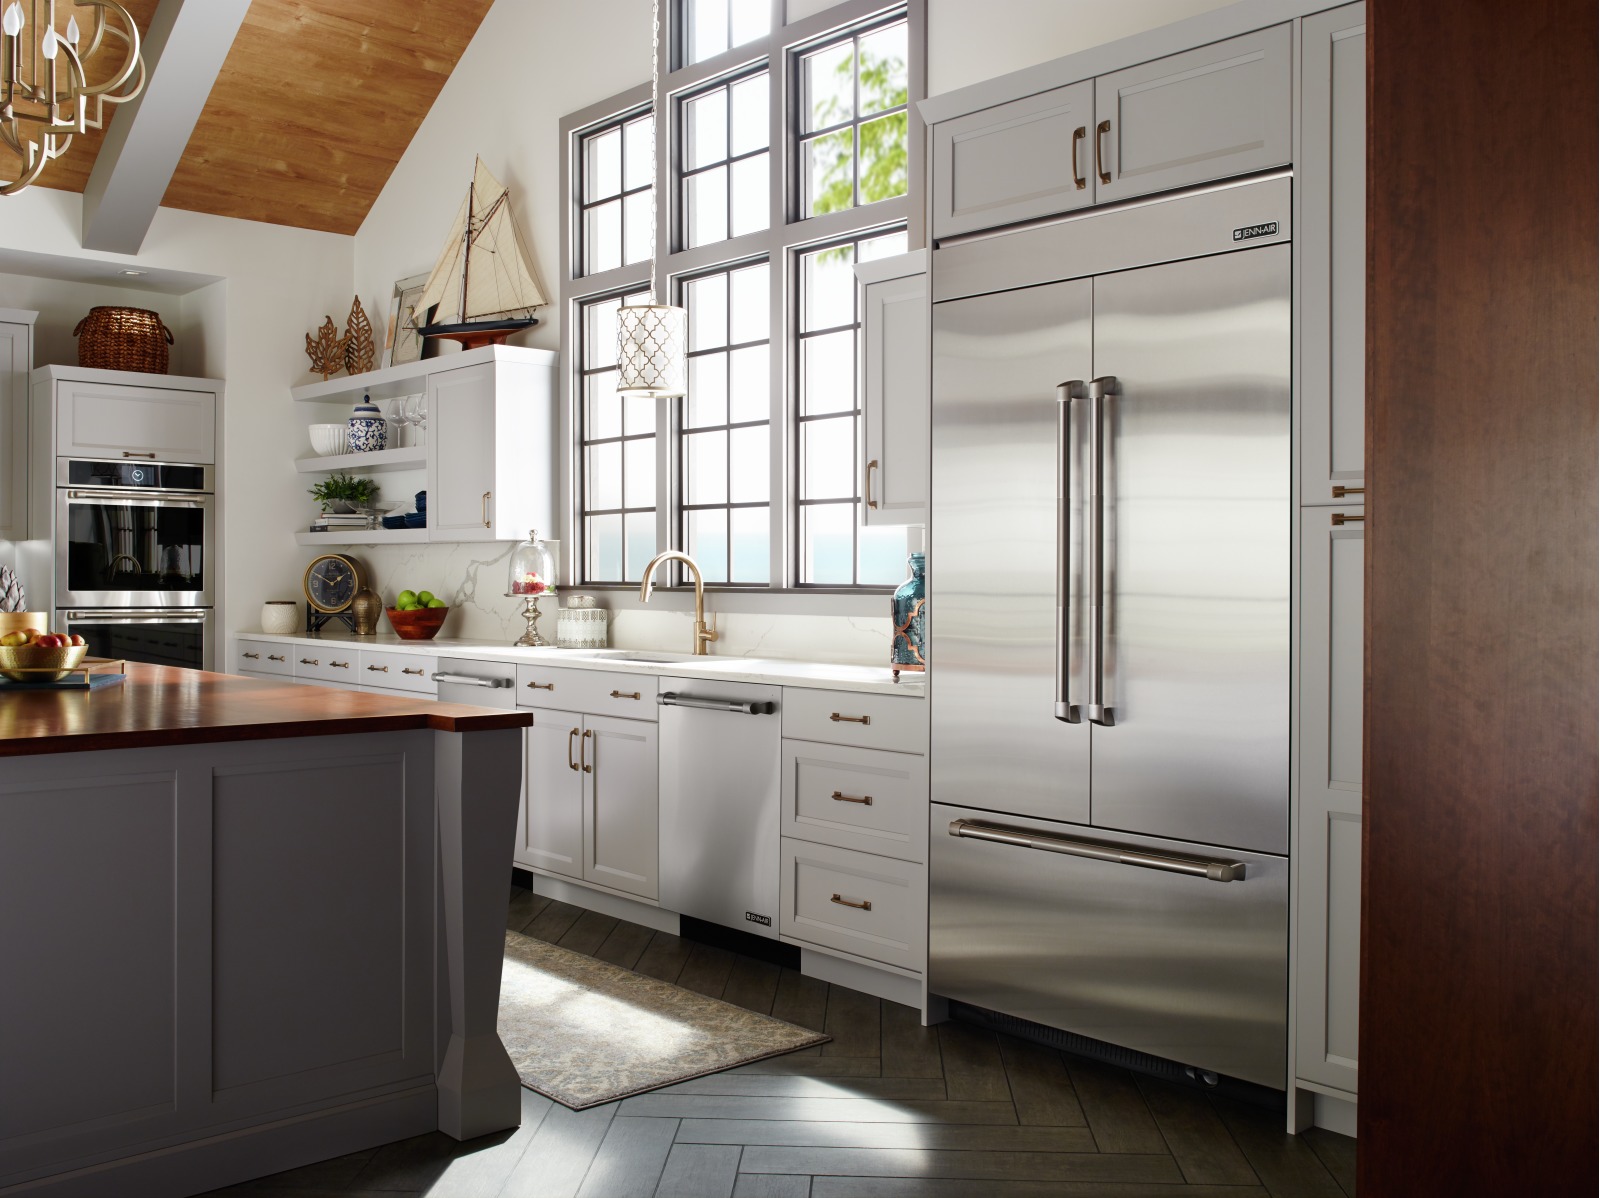 The Pros and Cons of Matching Appliances